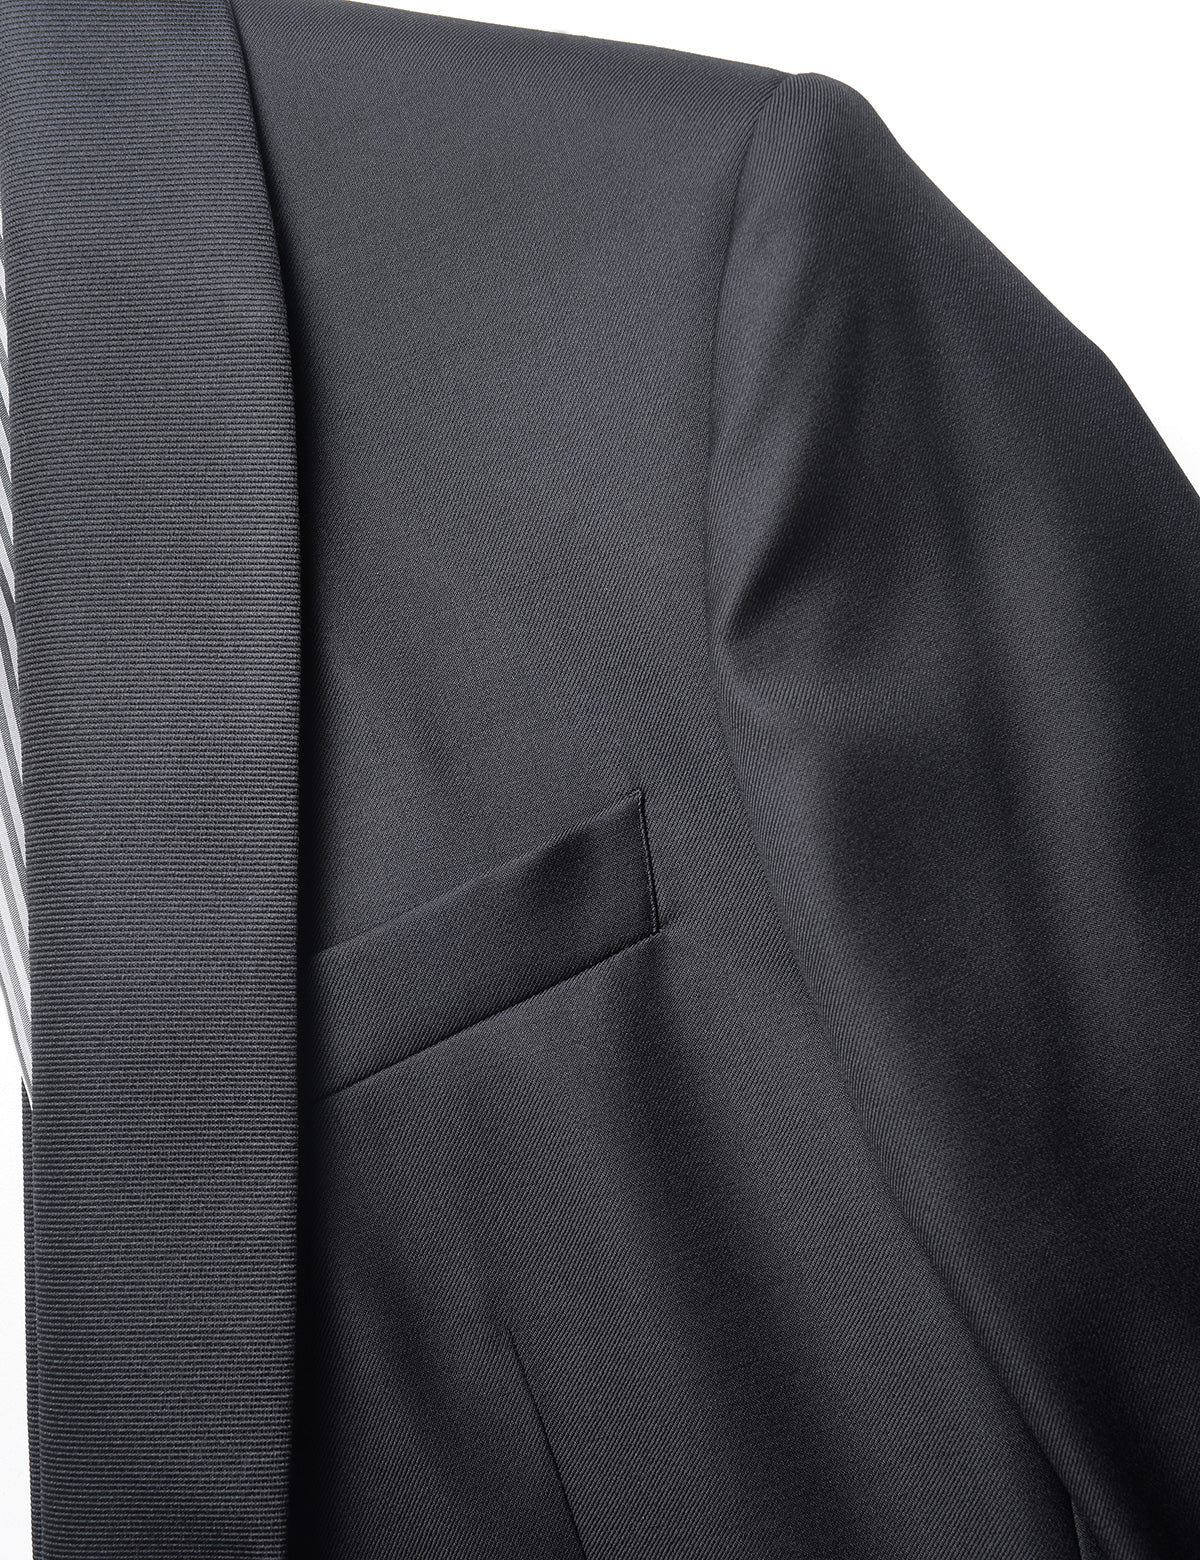 Detail shot of Brooklyn Tailors BKT50 Shawl Collar Tuxedo Jacket in Super 120s Twill - Black with Grosgrain Lapel showing lapel and pocket